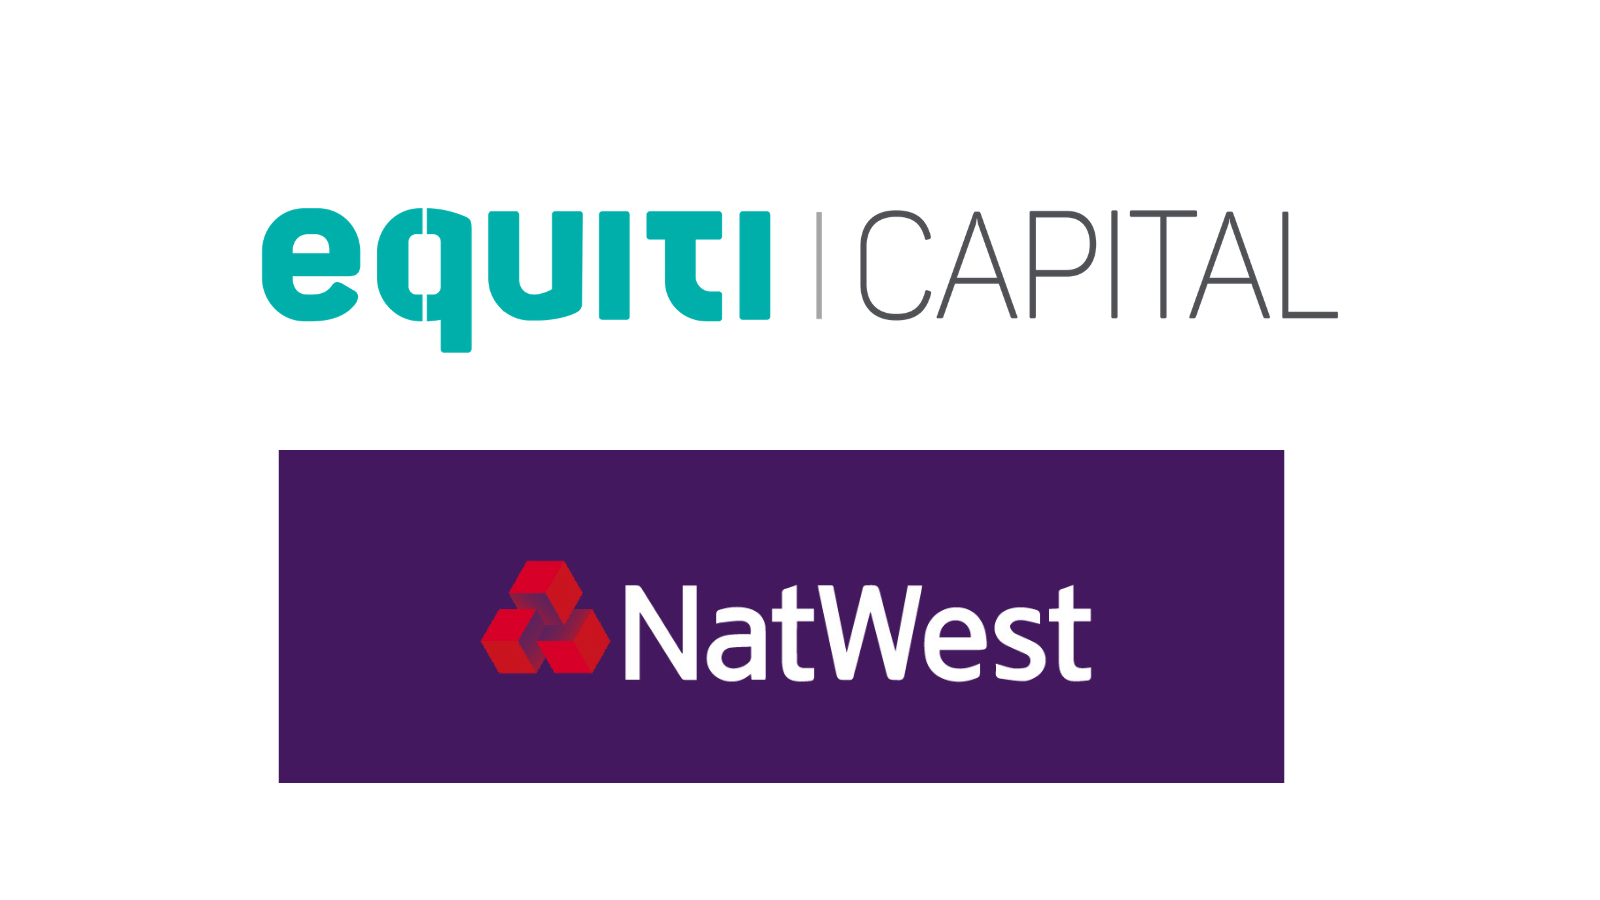 Equiti Capital Bolsters FX Services With Addition of NatWest as Second Prime Broker